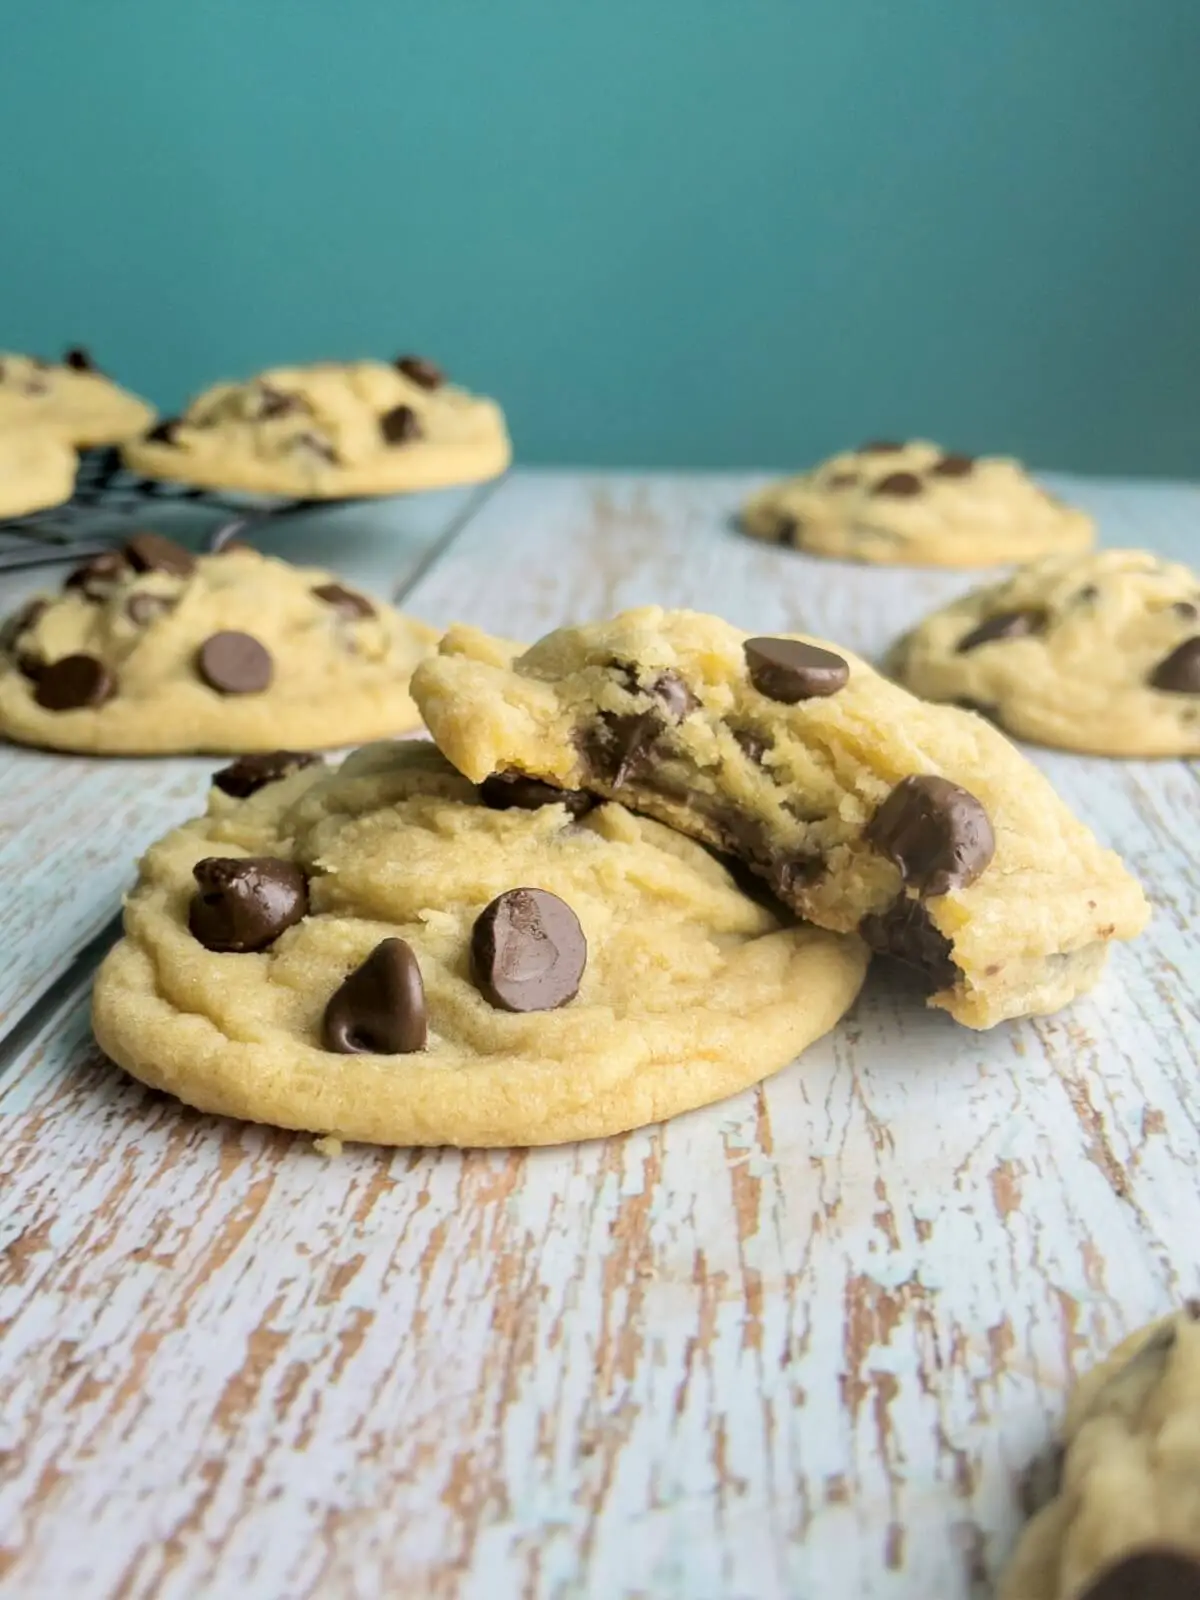 A close up of very soft and chewy chocolate chip cookies on a table